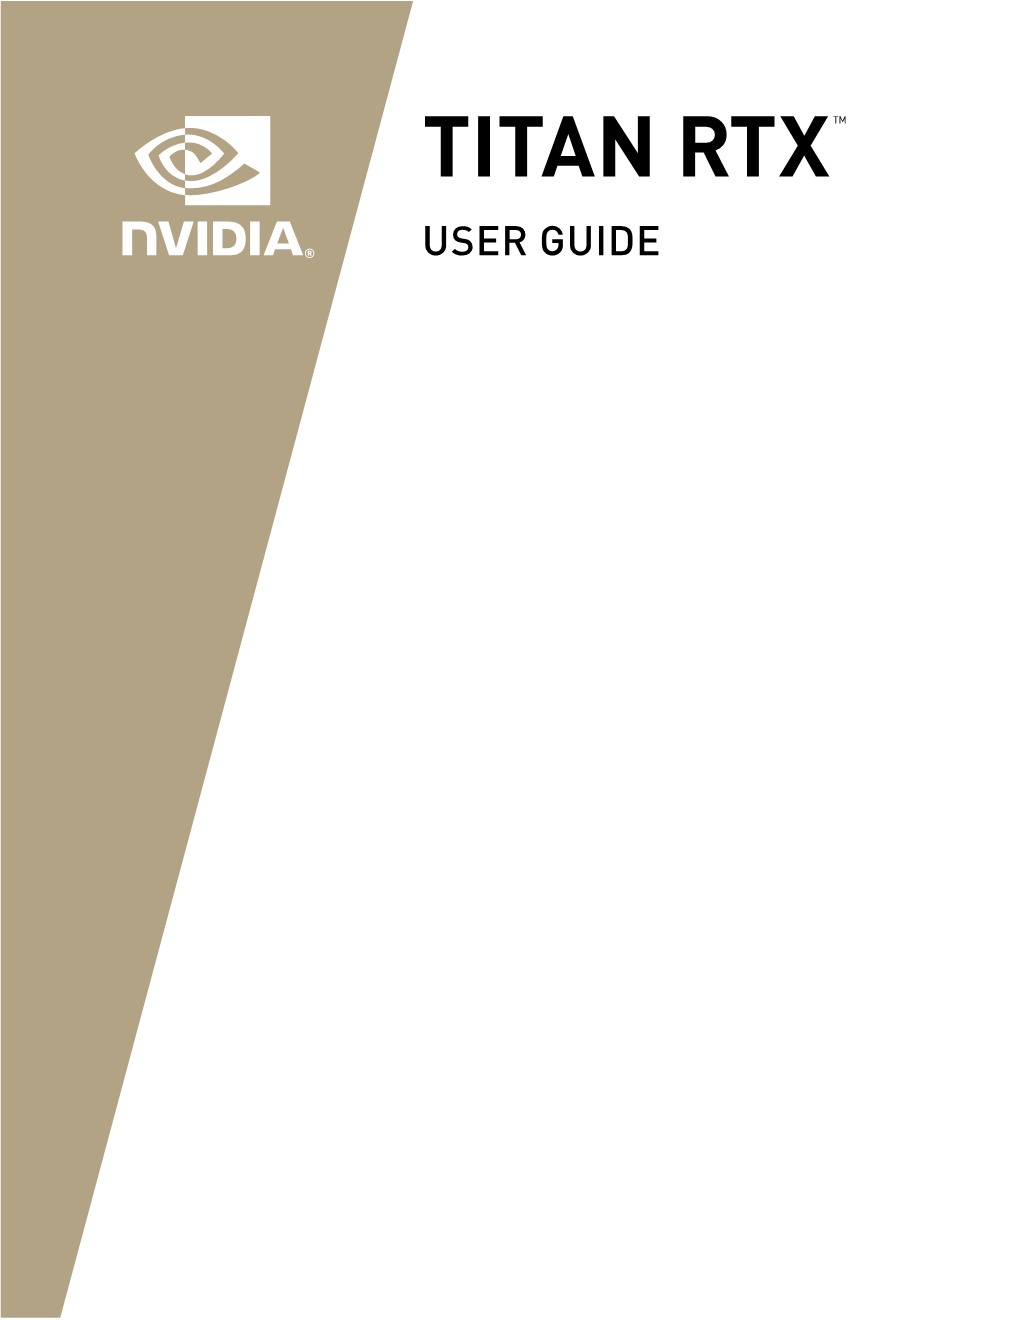 TITAN RTX User Guide | 3 Introduction